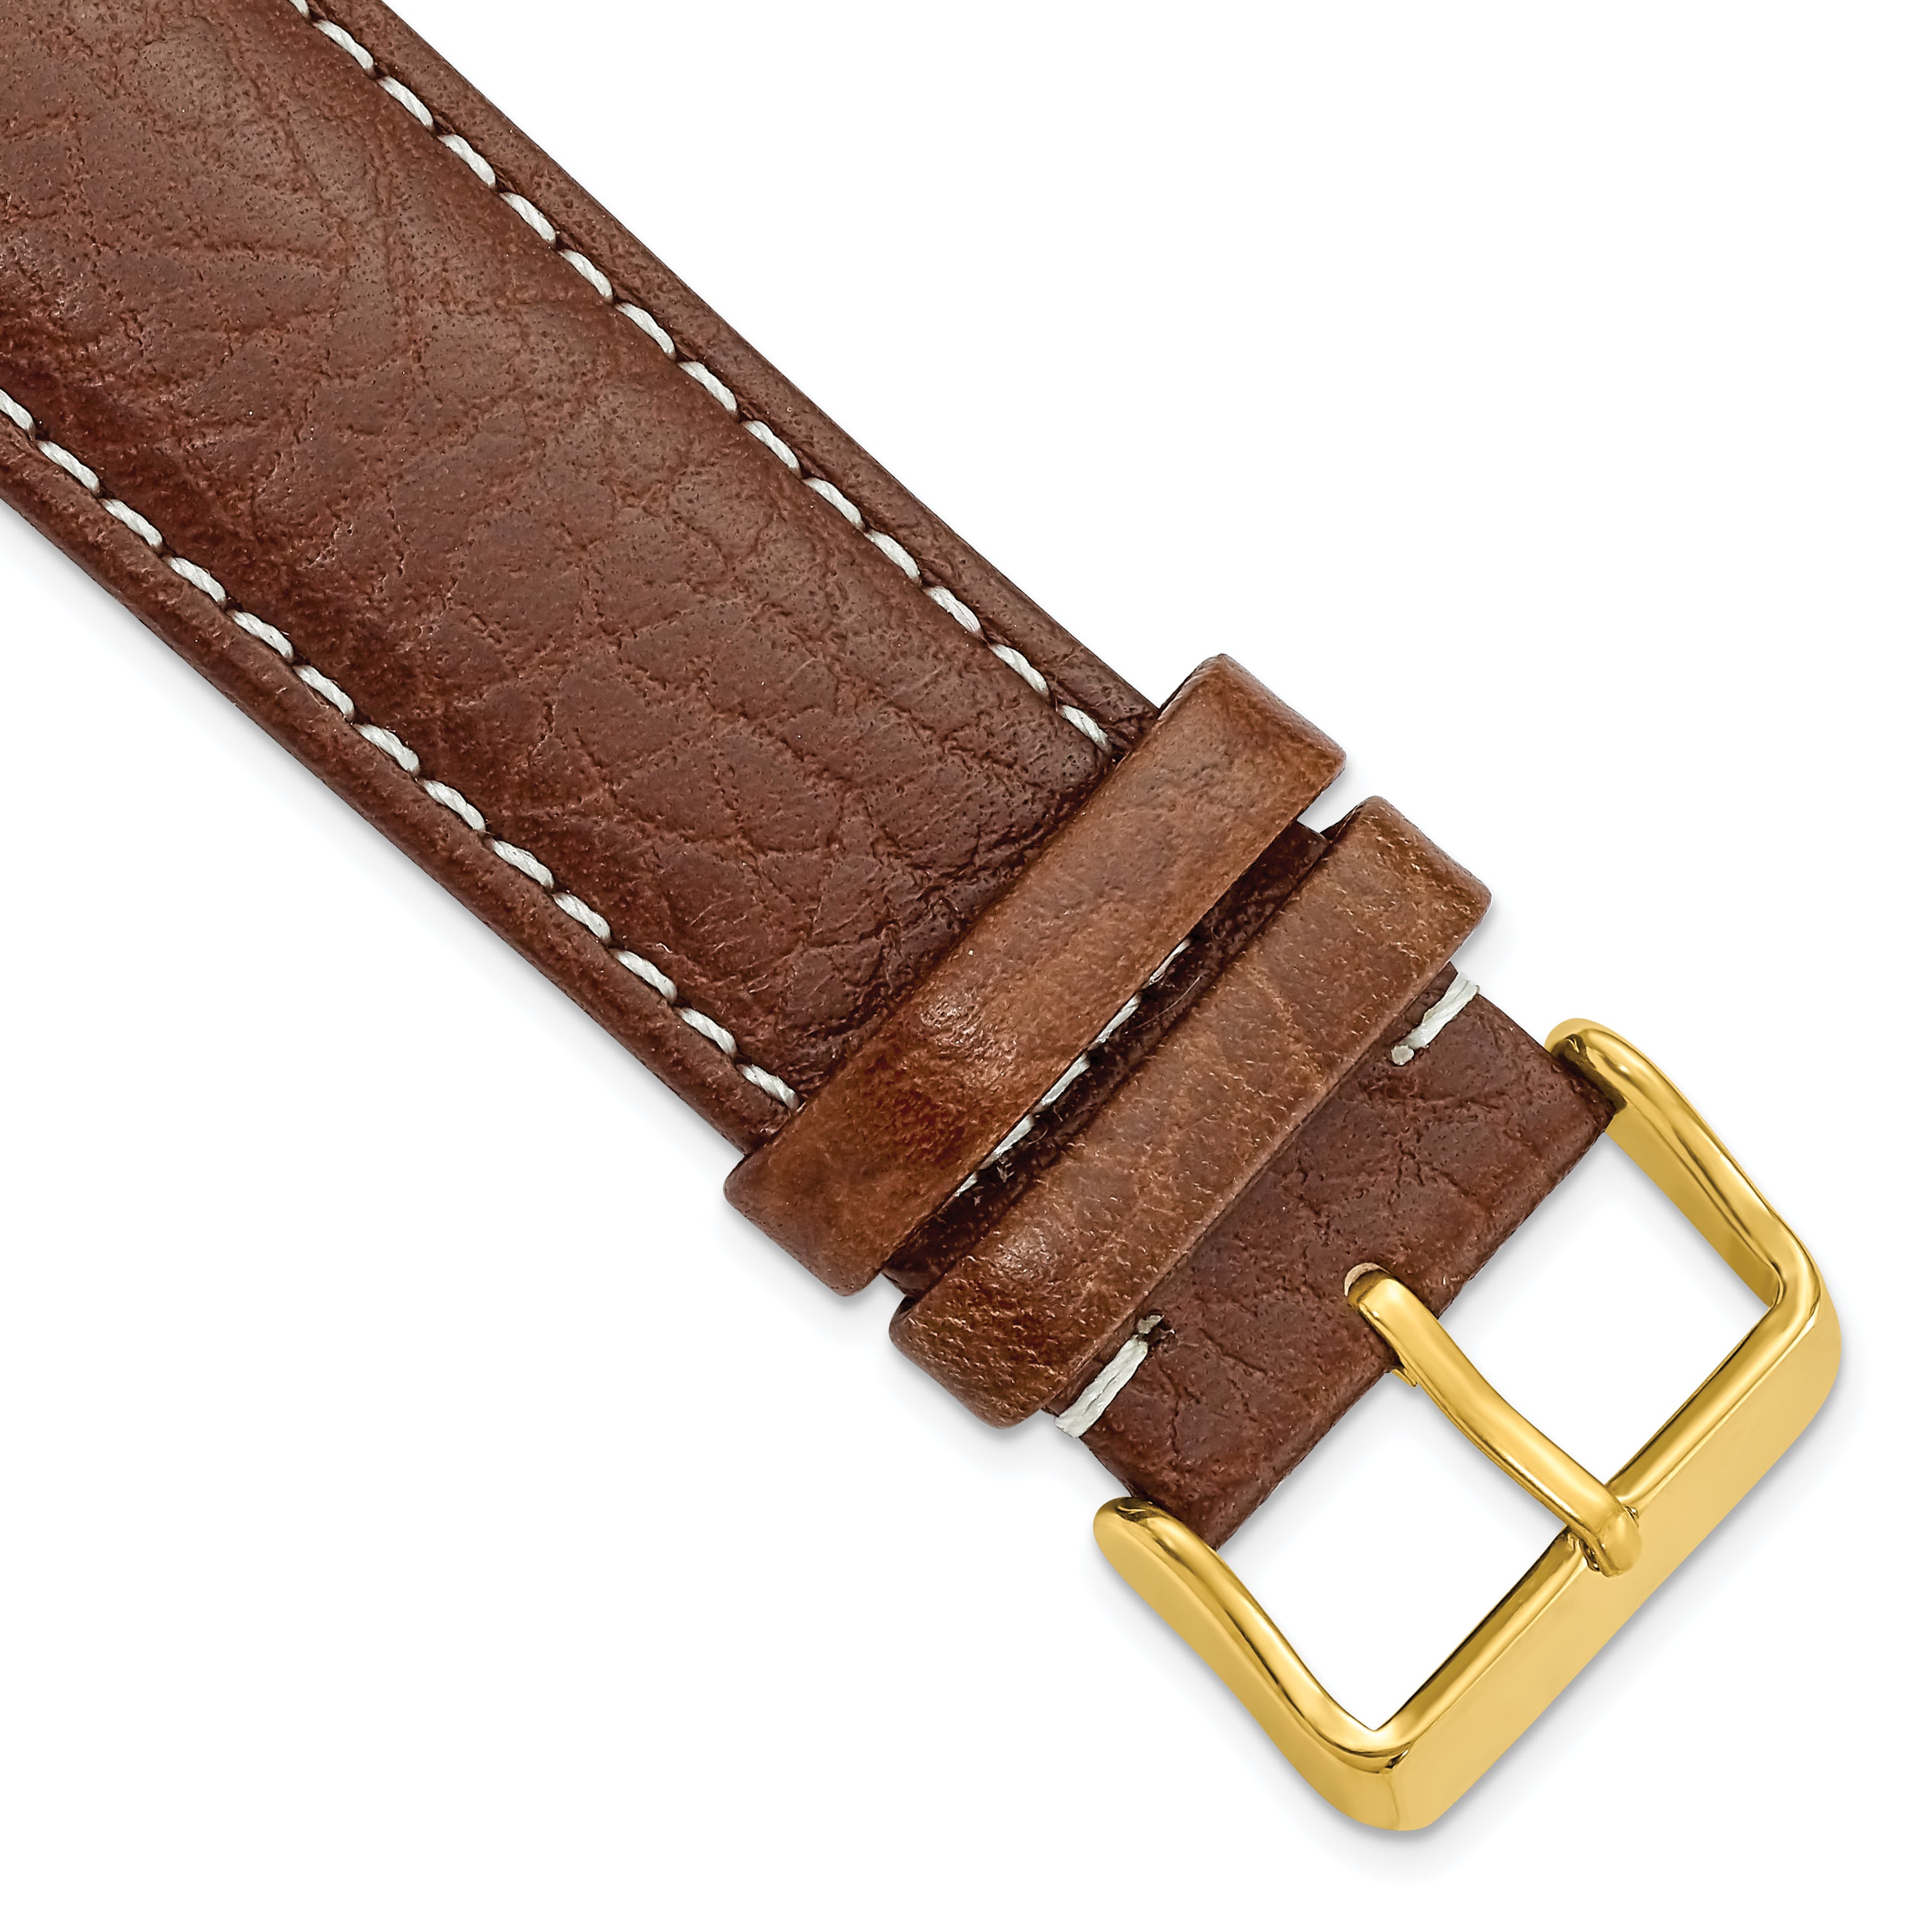 DeBeer 24mm Havana Sport Leather with White Stitching and Gold-tone Buckle 7.5 inch Watch Band